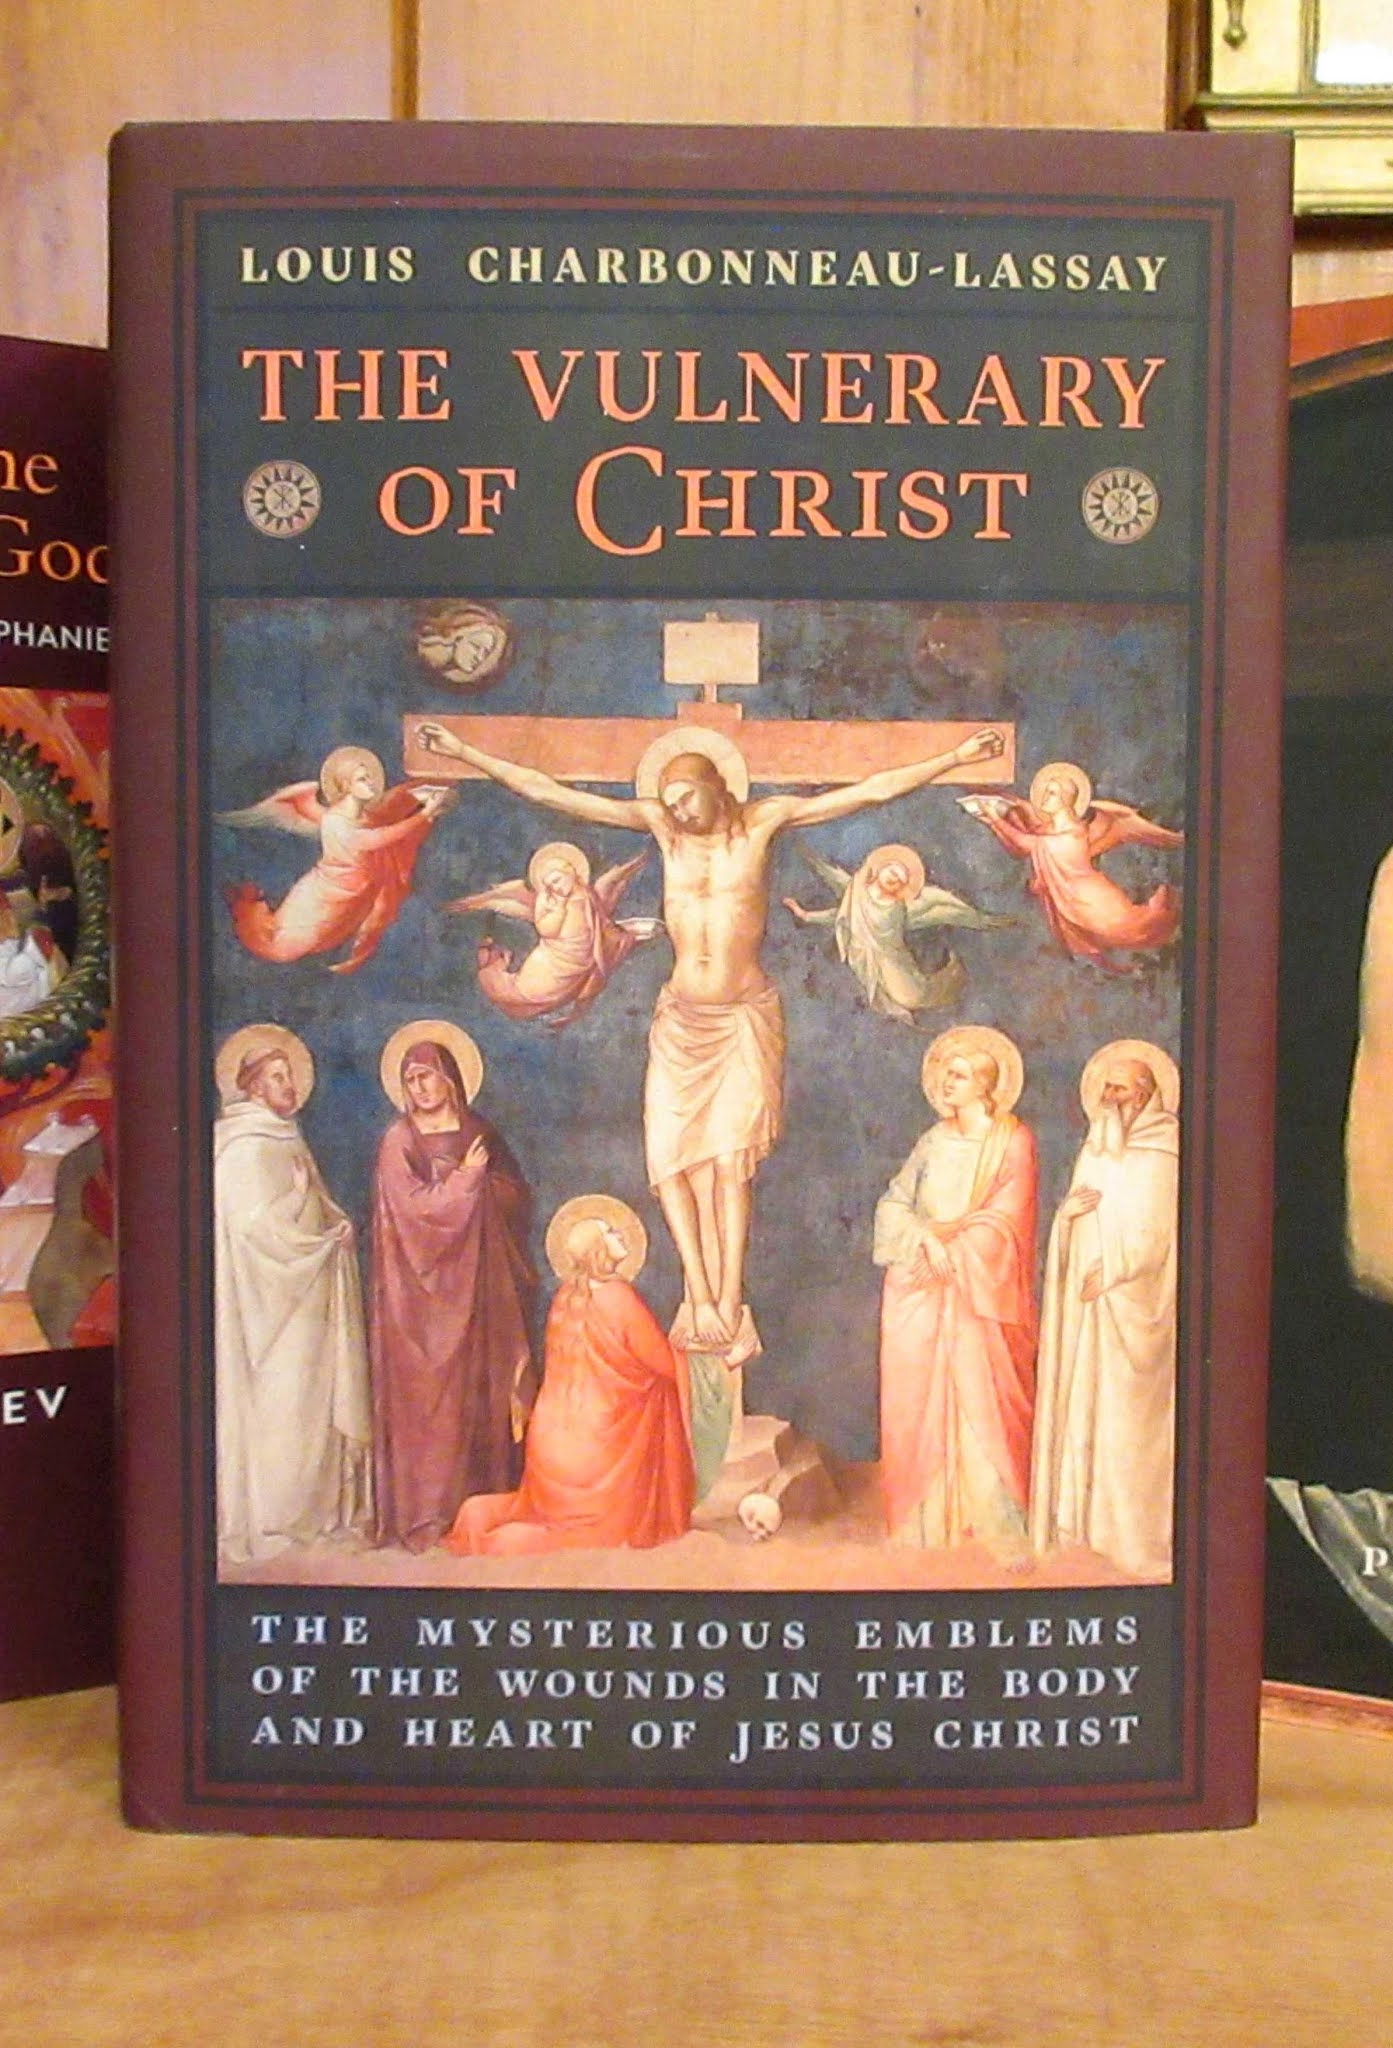 New Liturgical Movement: On the Origins of the Devotion to, and Depictions  of, the Wounds, Blood, and Heart of Christ